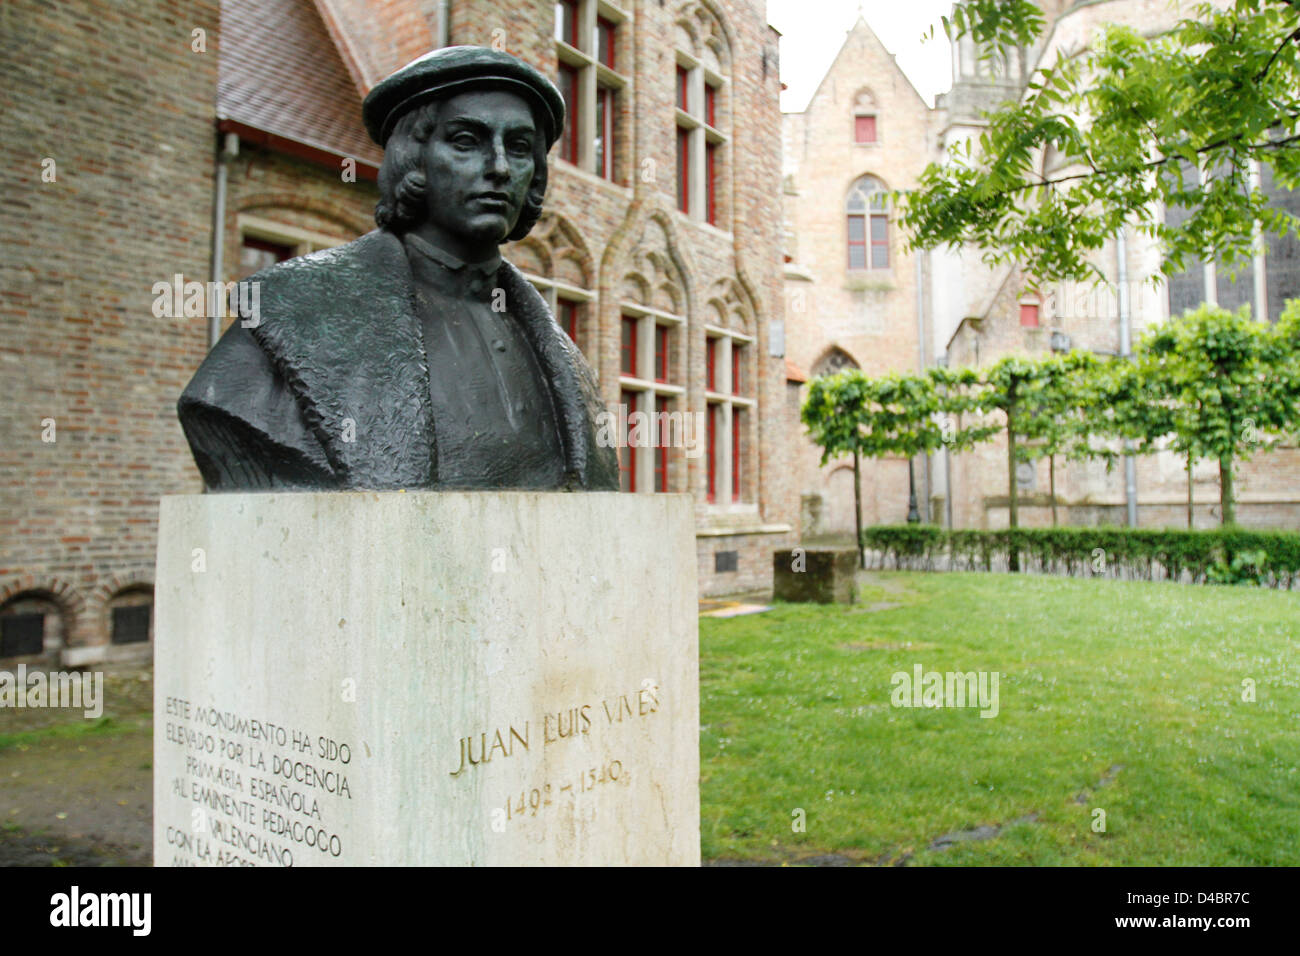 Travel images from Brugge, Belgium - Conmemorative statue in honor to Juan Lluis Vives, a spanish humanist that studied in Brugg Stock Photo